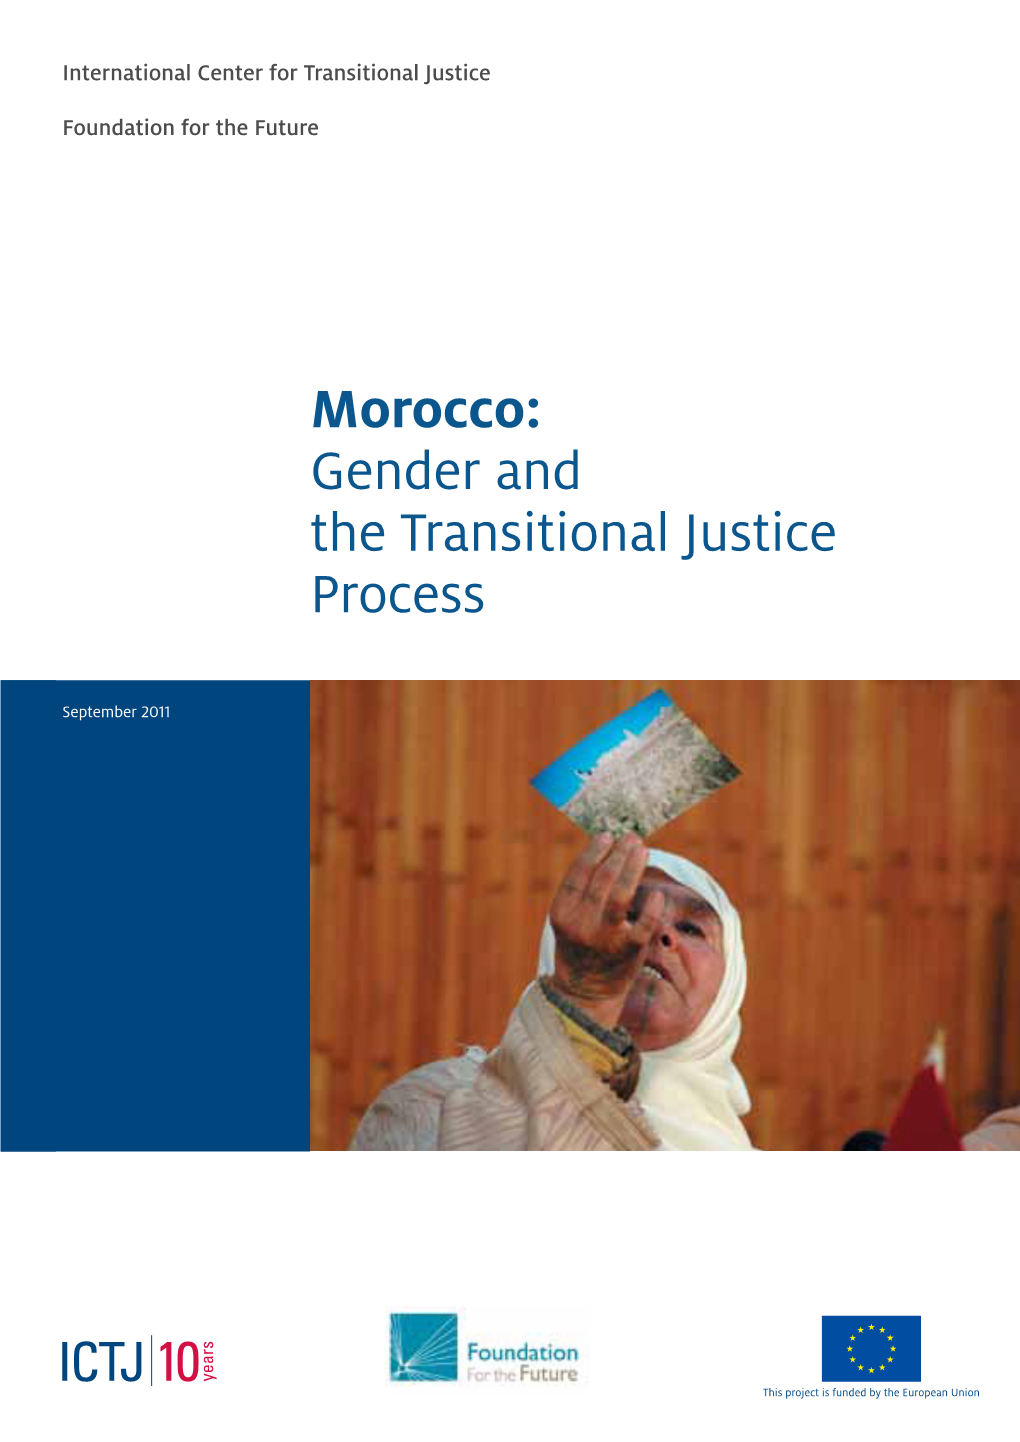 Morocco: Gender and the Transitional Justice Process